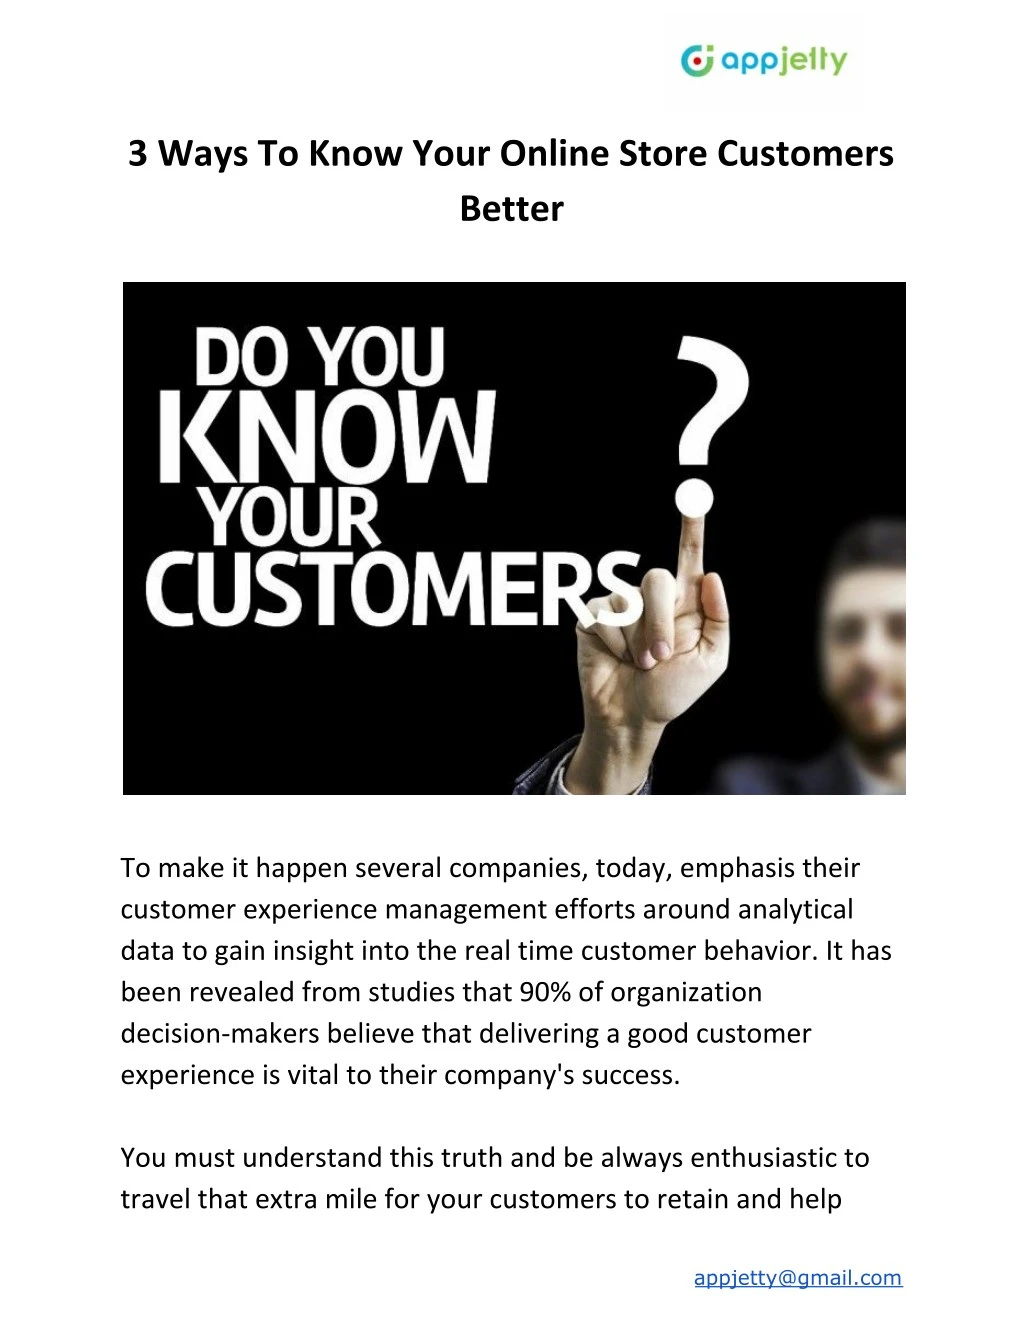 3 ways to know your online store customers better